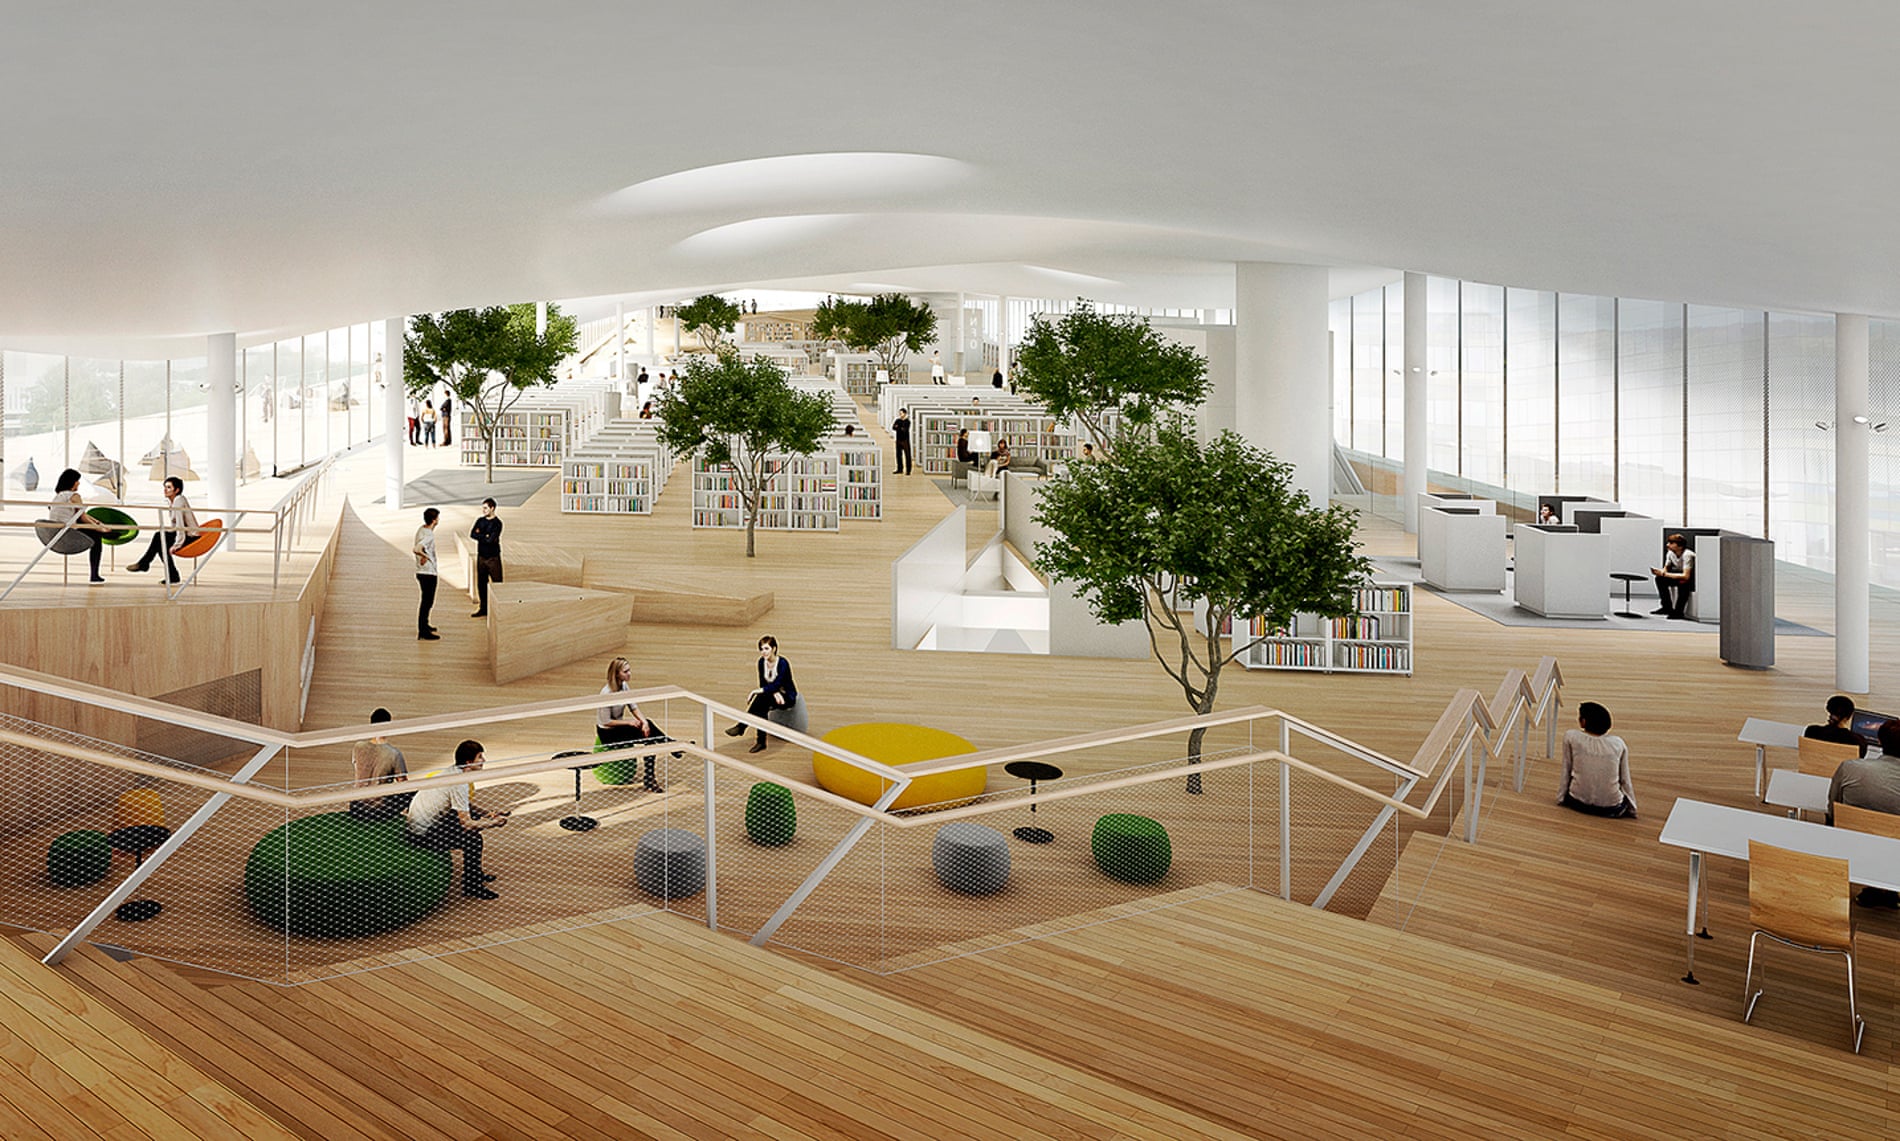 An artist’s impression of the top floor of Helsinki’s new Oodi library